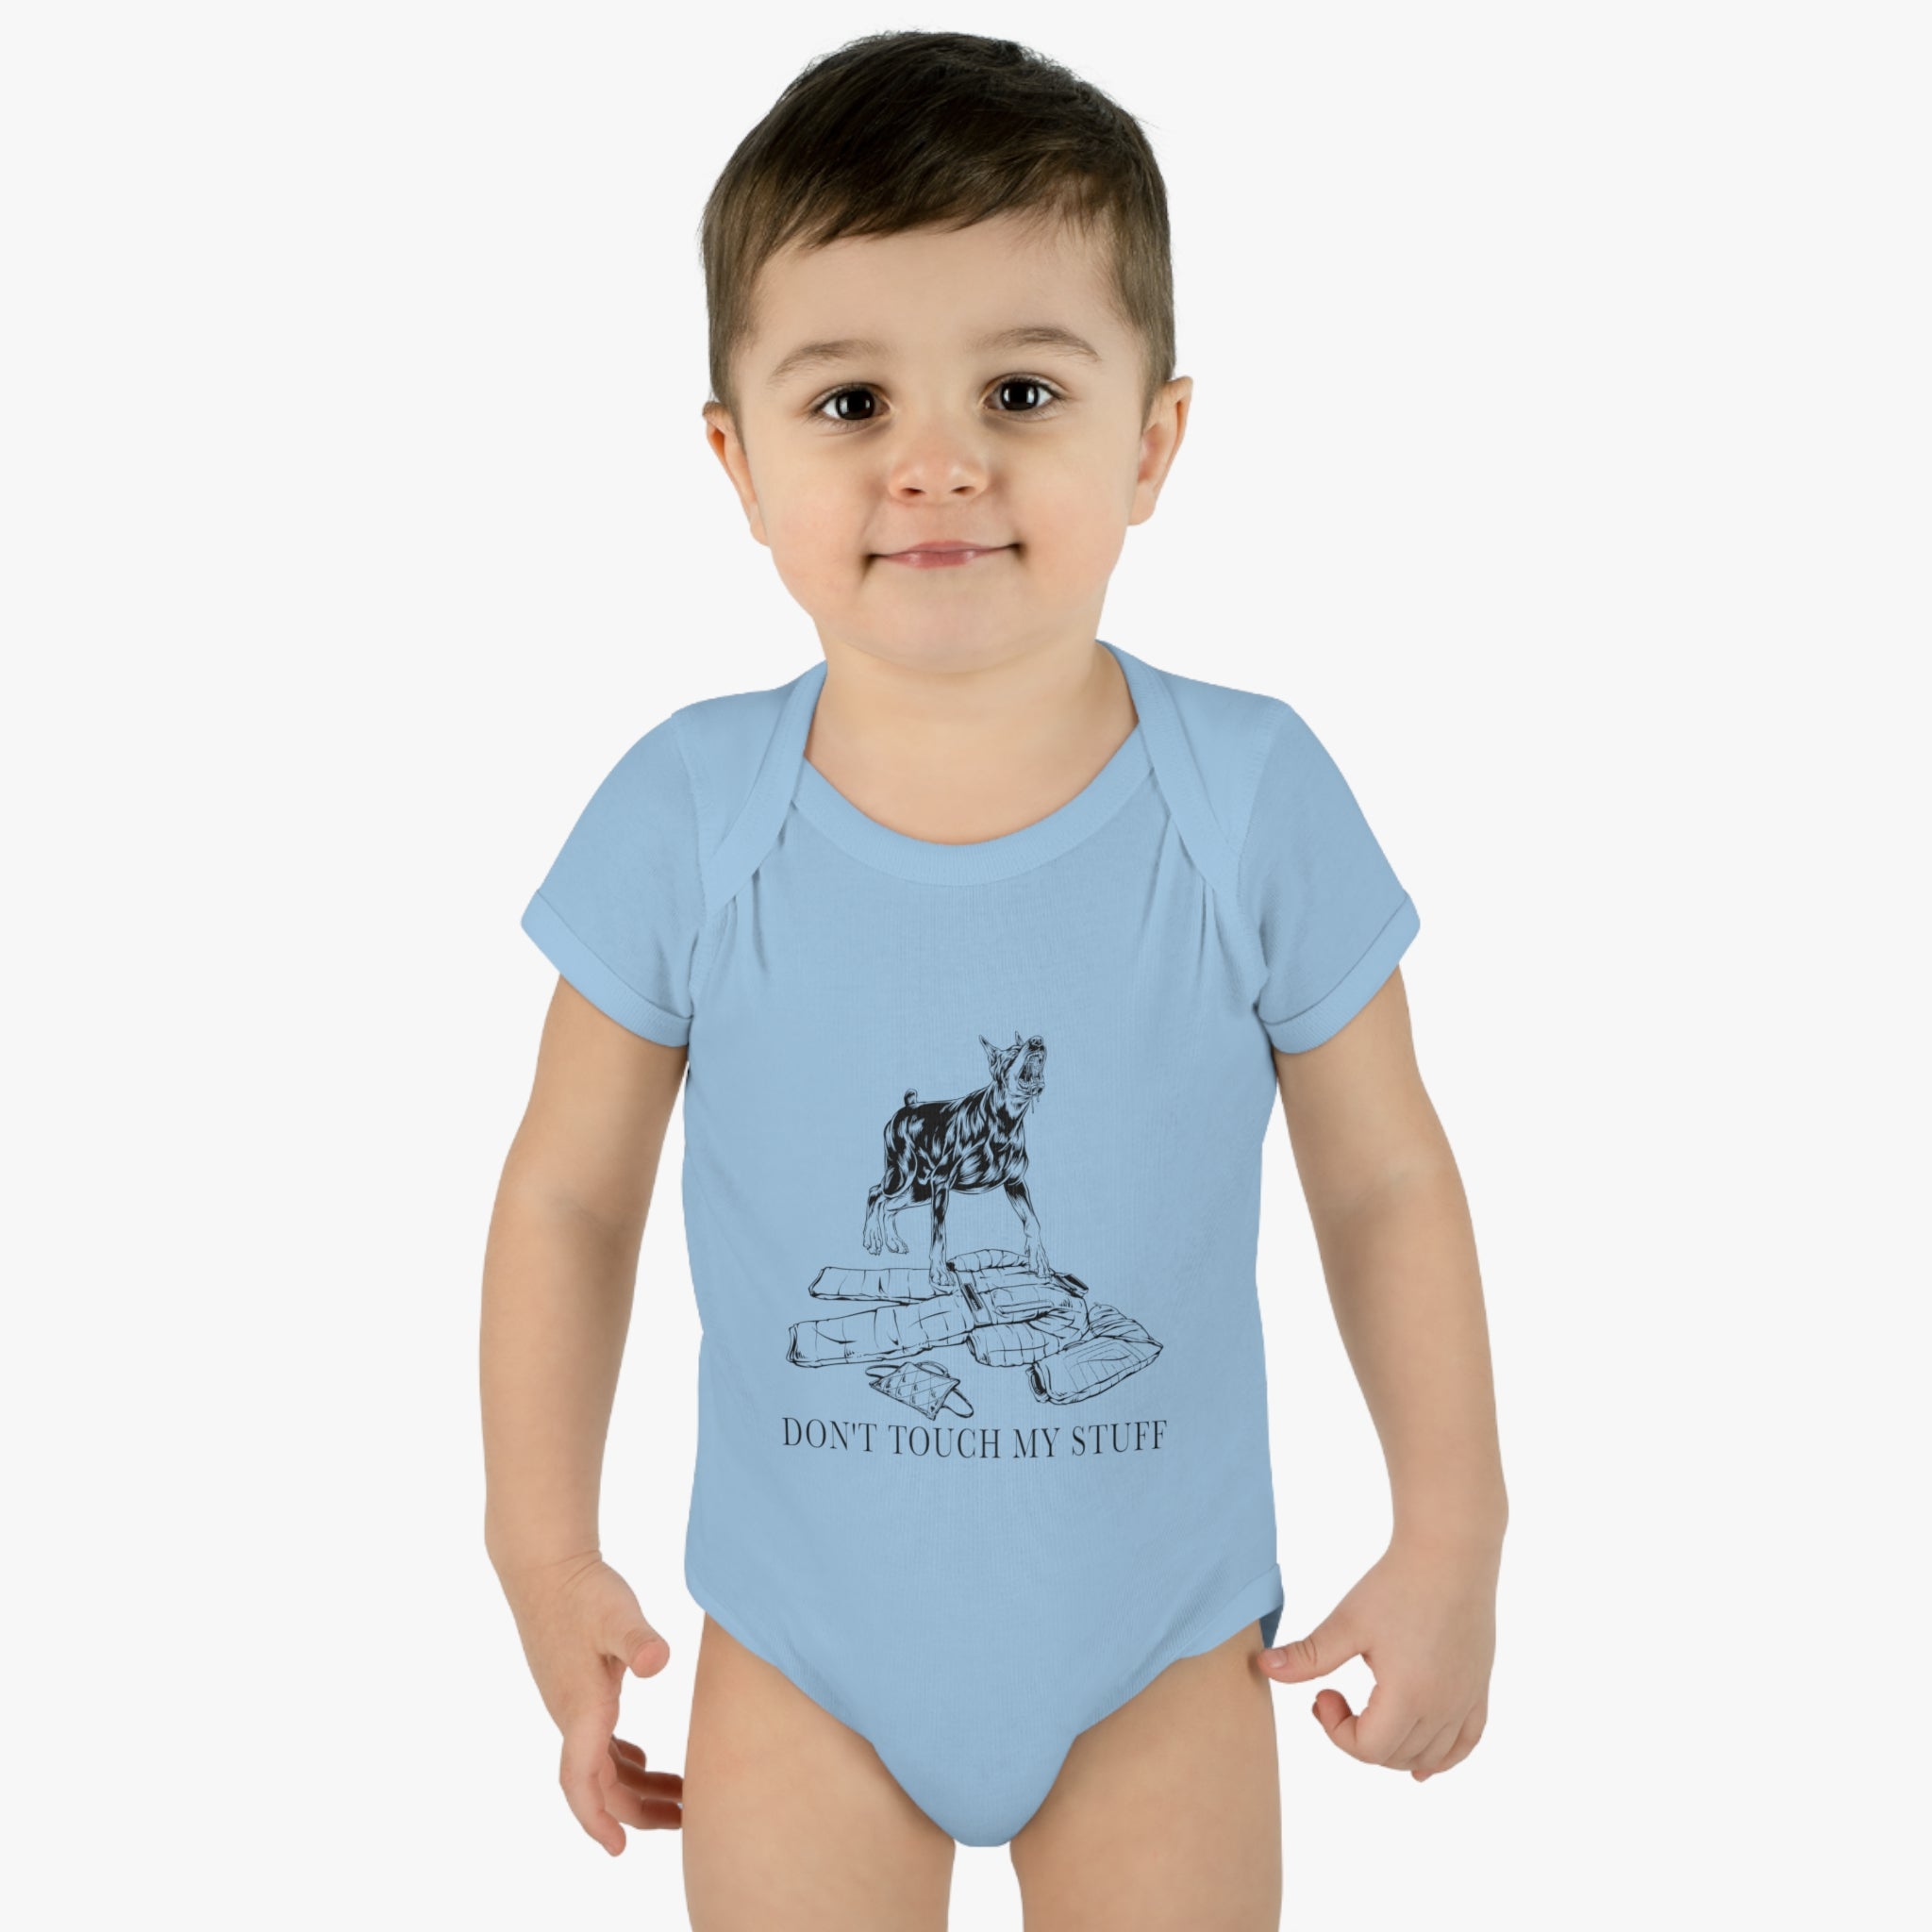 Doberman - Don't Touch My Stuff - Baby Onsie